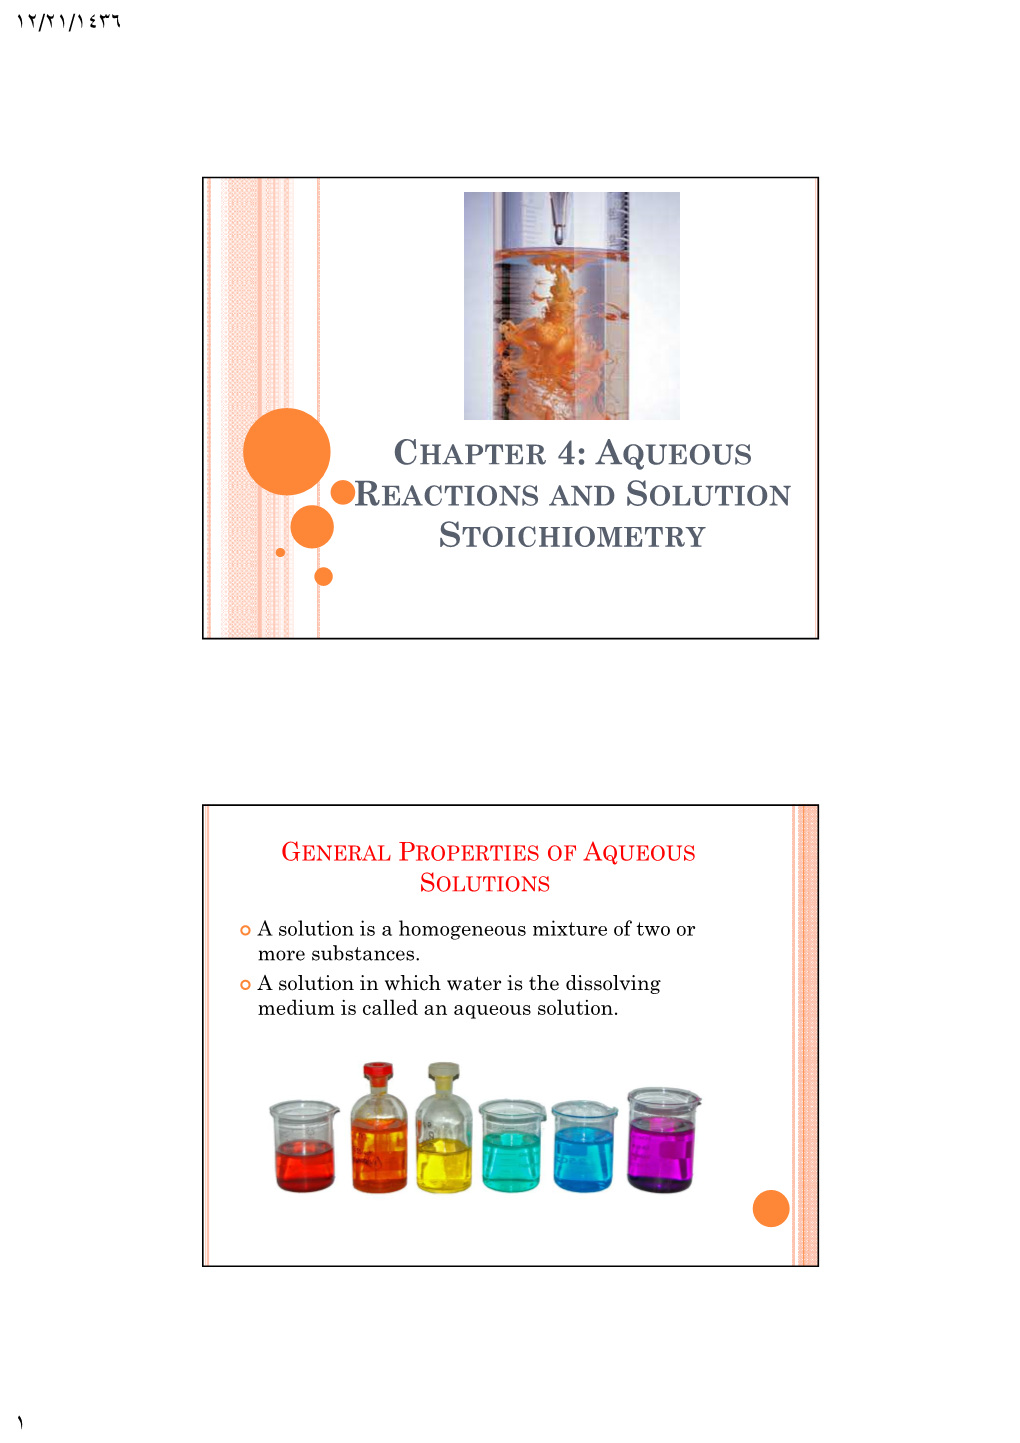 Chapter 4: Aqueous Reactions and Solution Stoichiometry